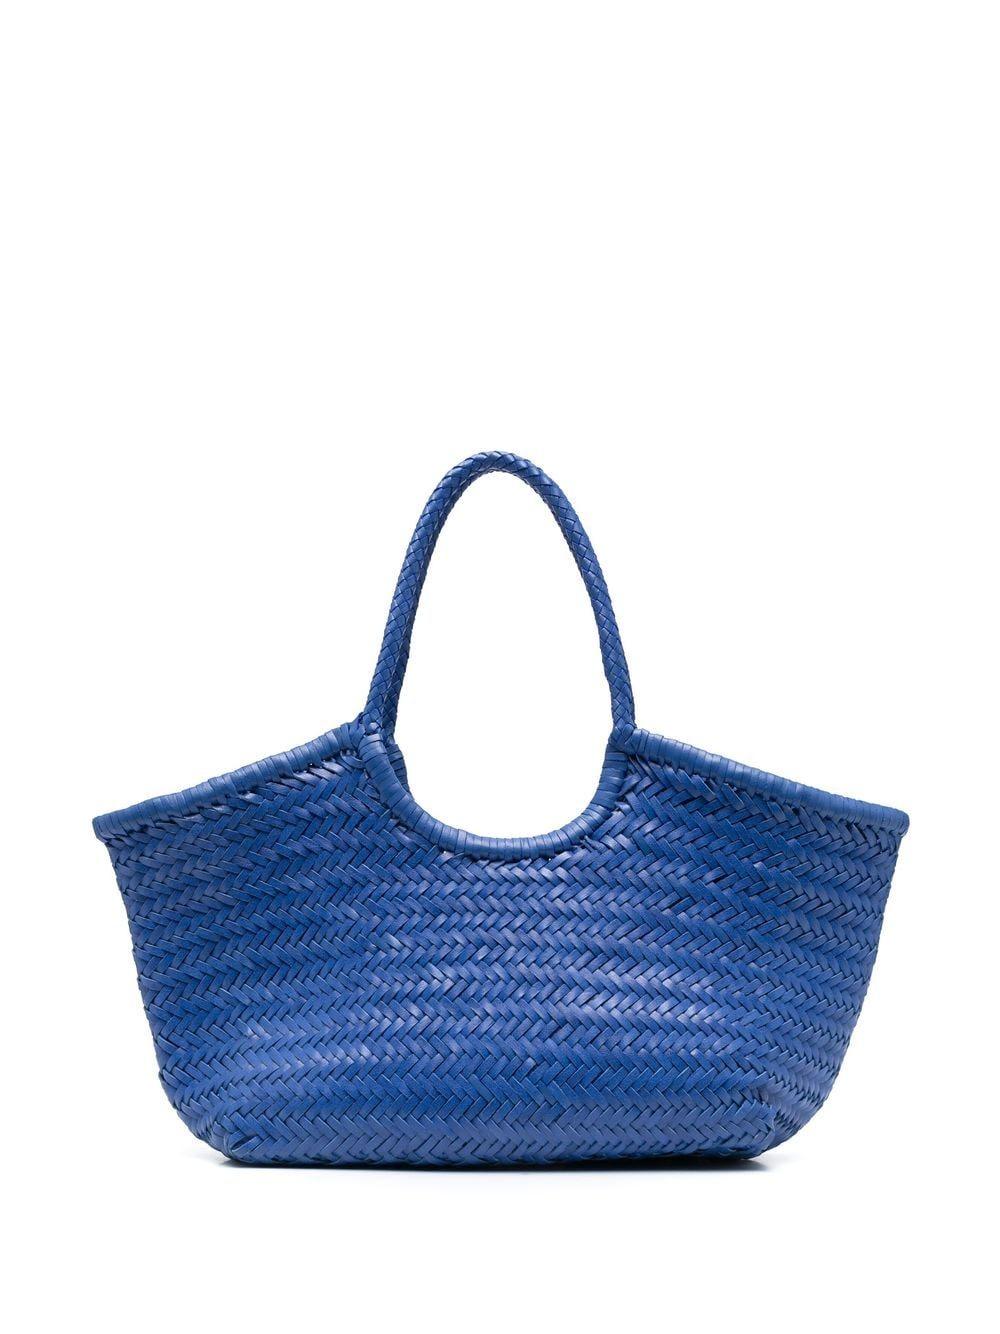 Dragon Diffusion Woven Leather Tote Bag in Blue | Lyst